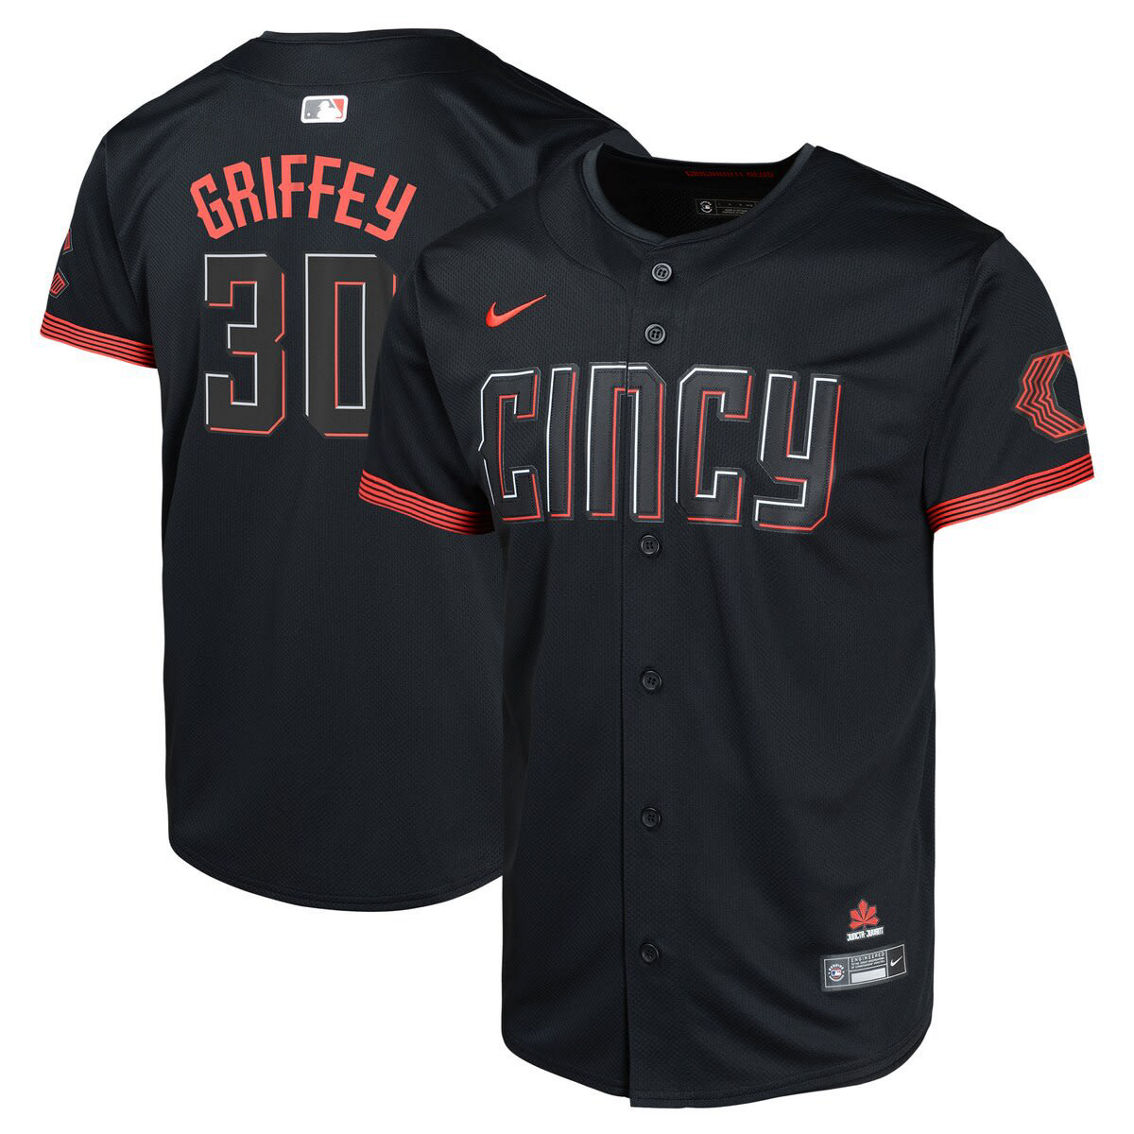 Nike Youth Ken Griffey Jr. Black Cincinnati Reds City Connect Limited Player Jersey - Image 2 of 4